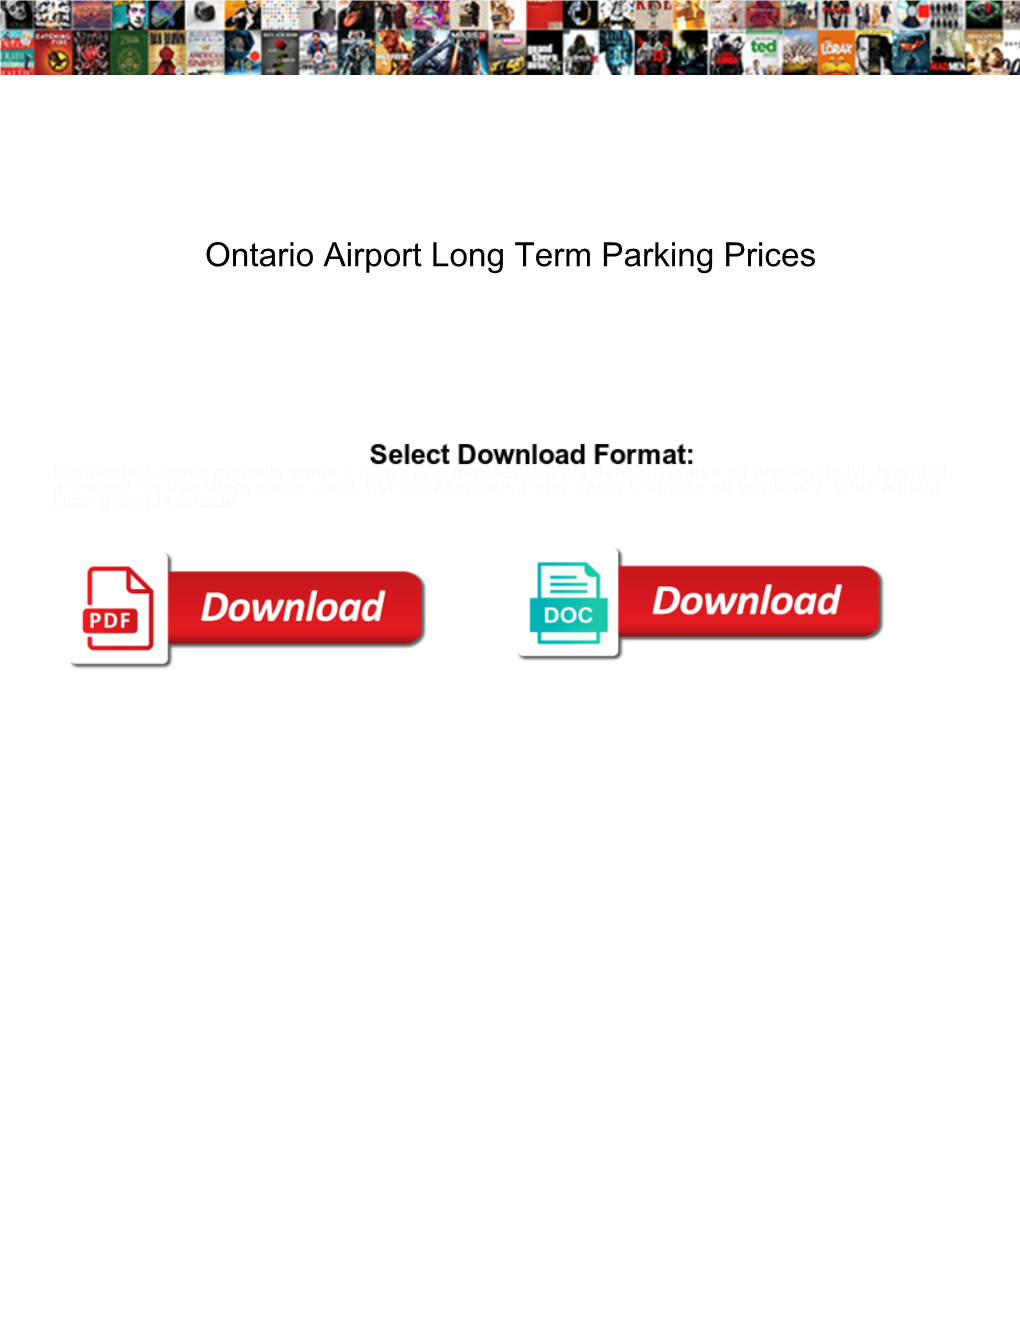 Ontario Airport Long Term Parking Prices